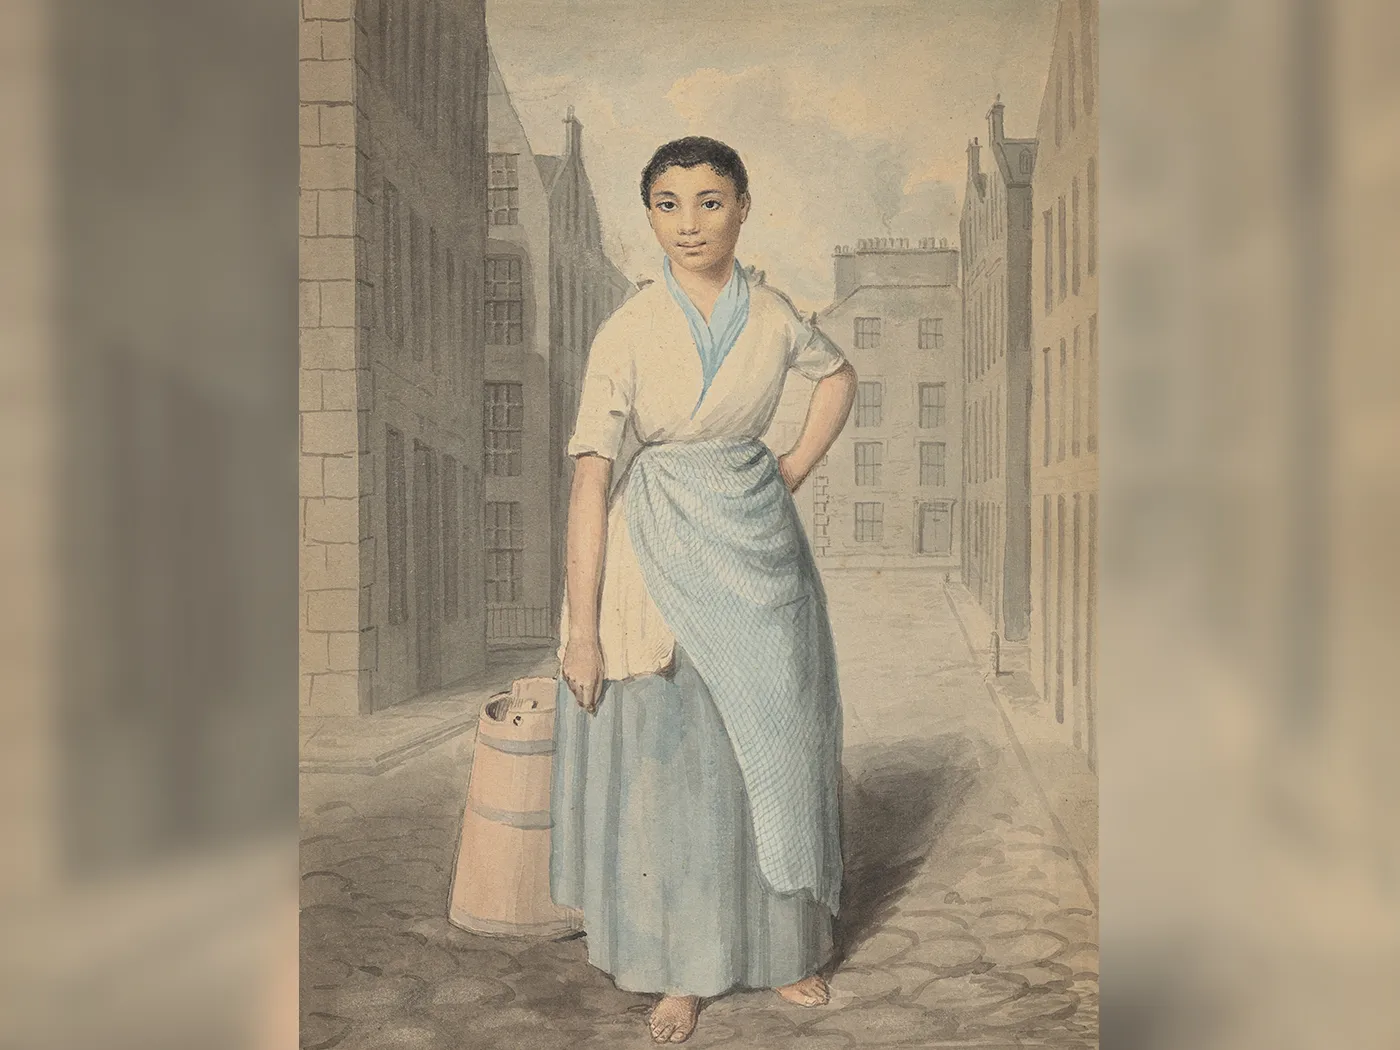 See a Rare Watercolor of a Black Woman Living in Edinburgh in the Late 18th Century | Smart News